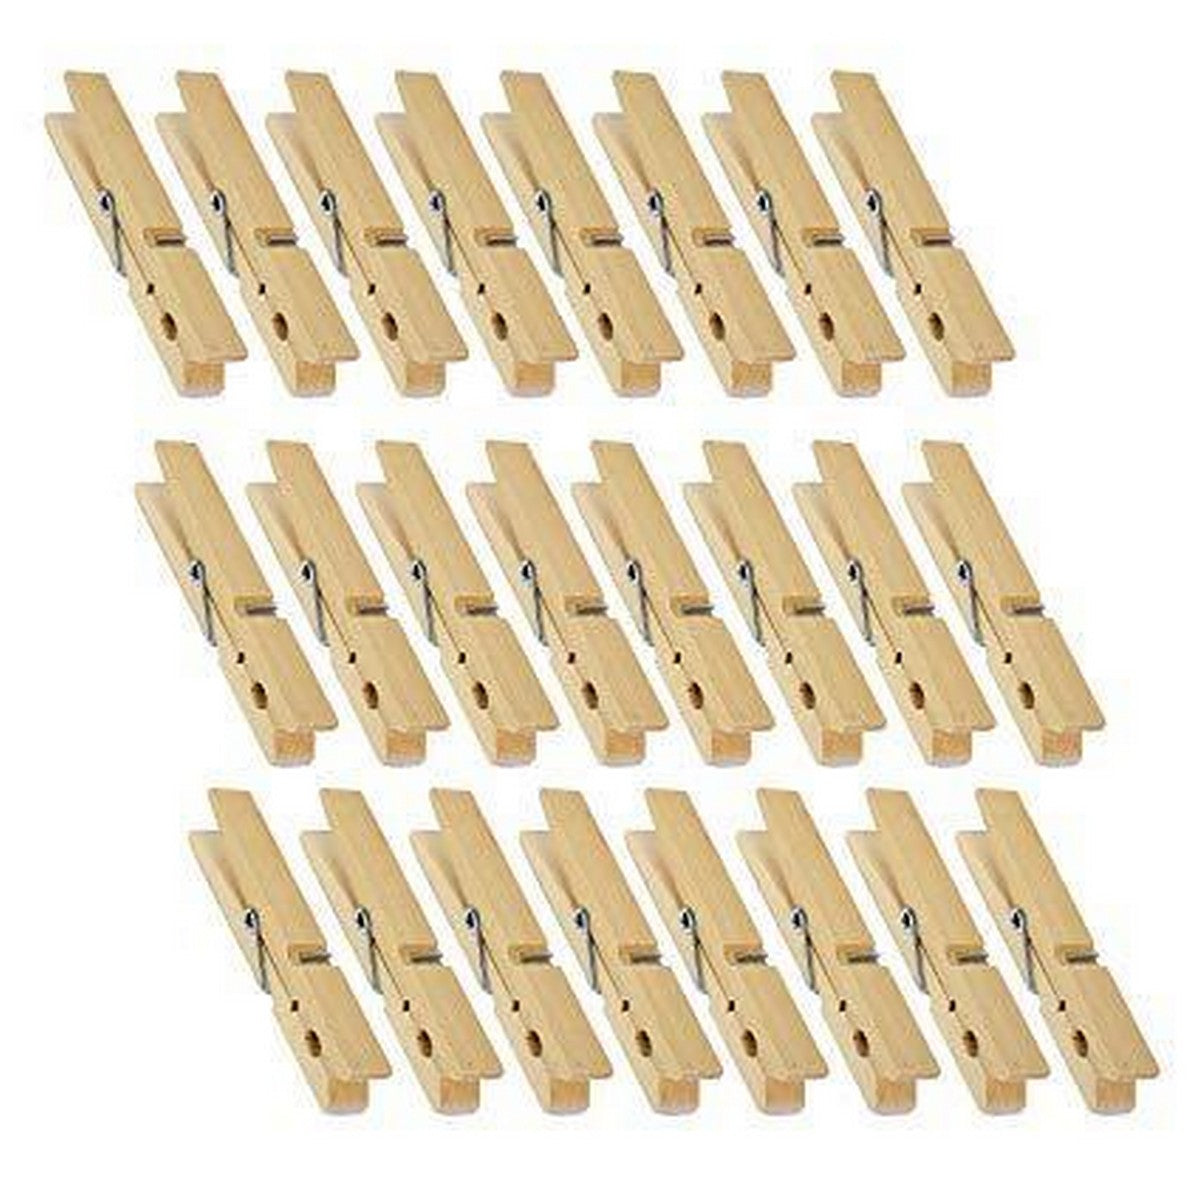 Pack of 20 - Natural Wood Laundry Clips - Rust Resistant and Durable